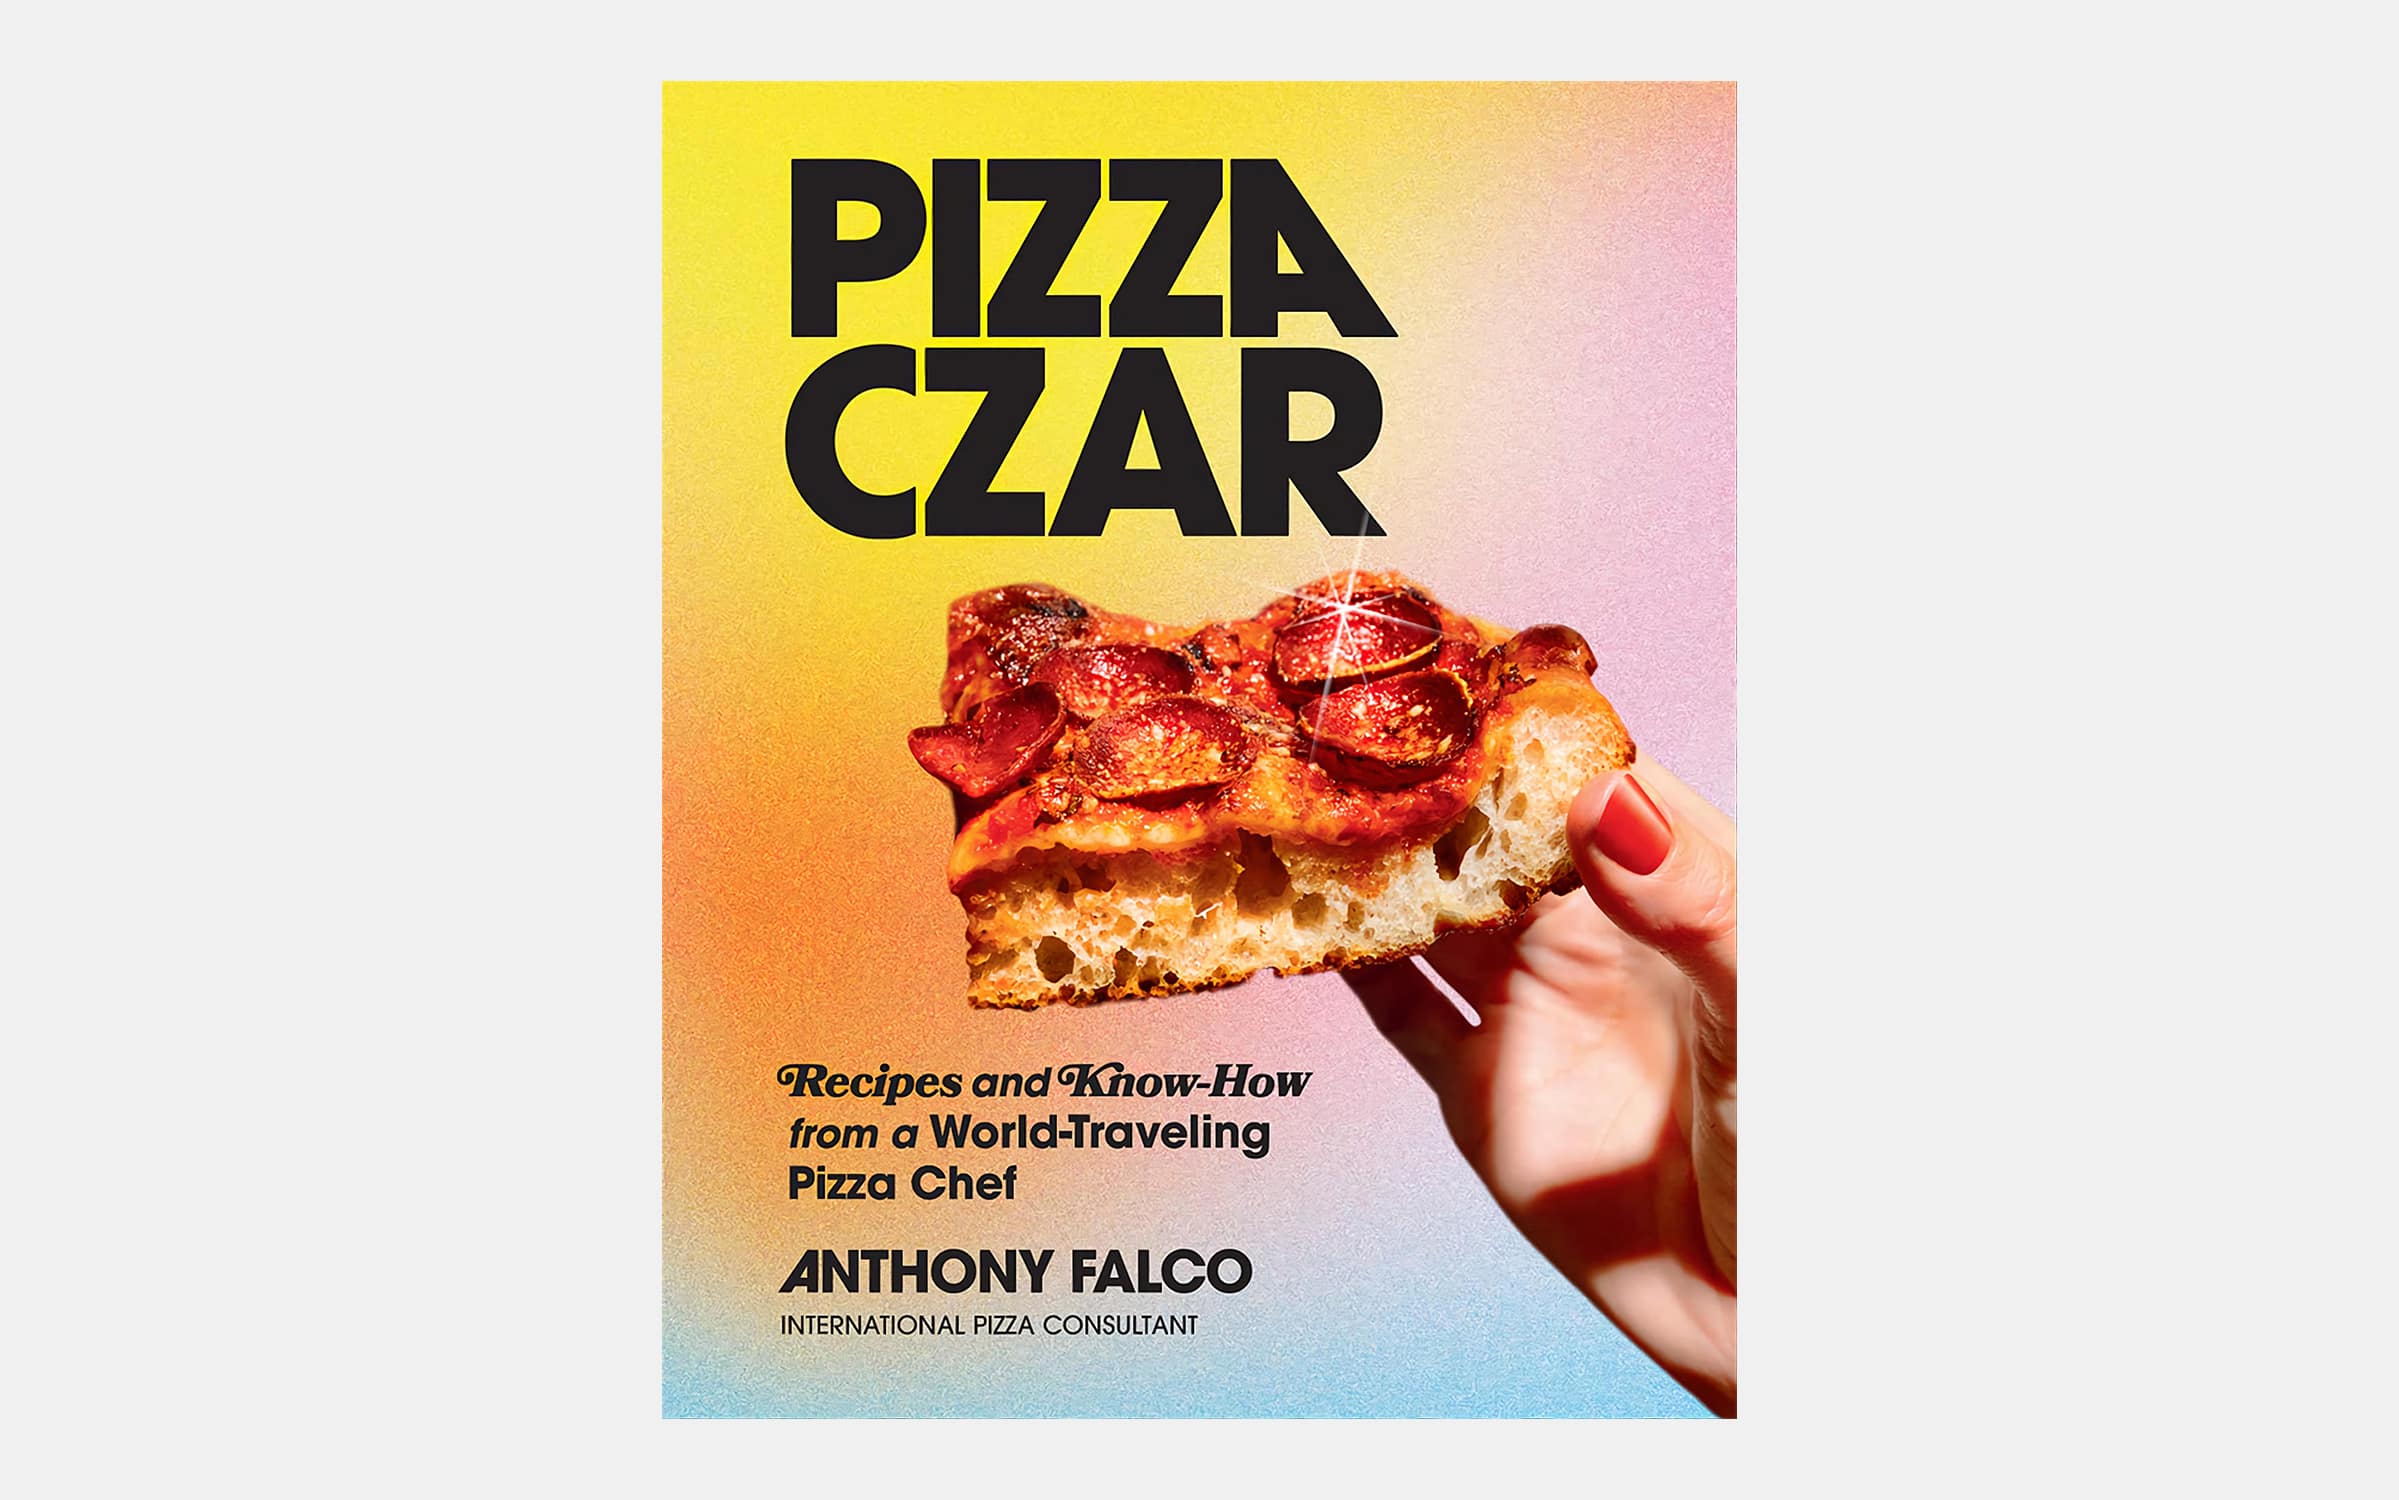 Pizza Czar: Recipes from a World-Traveling Pizza Chef